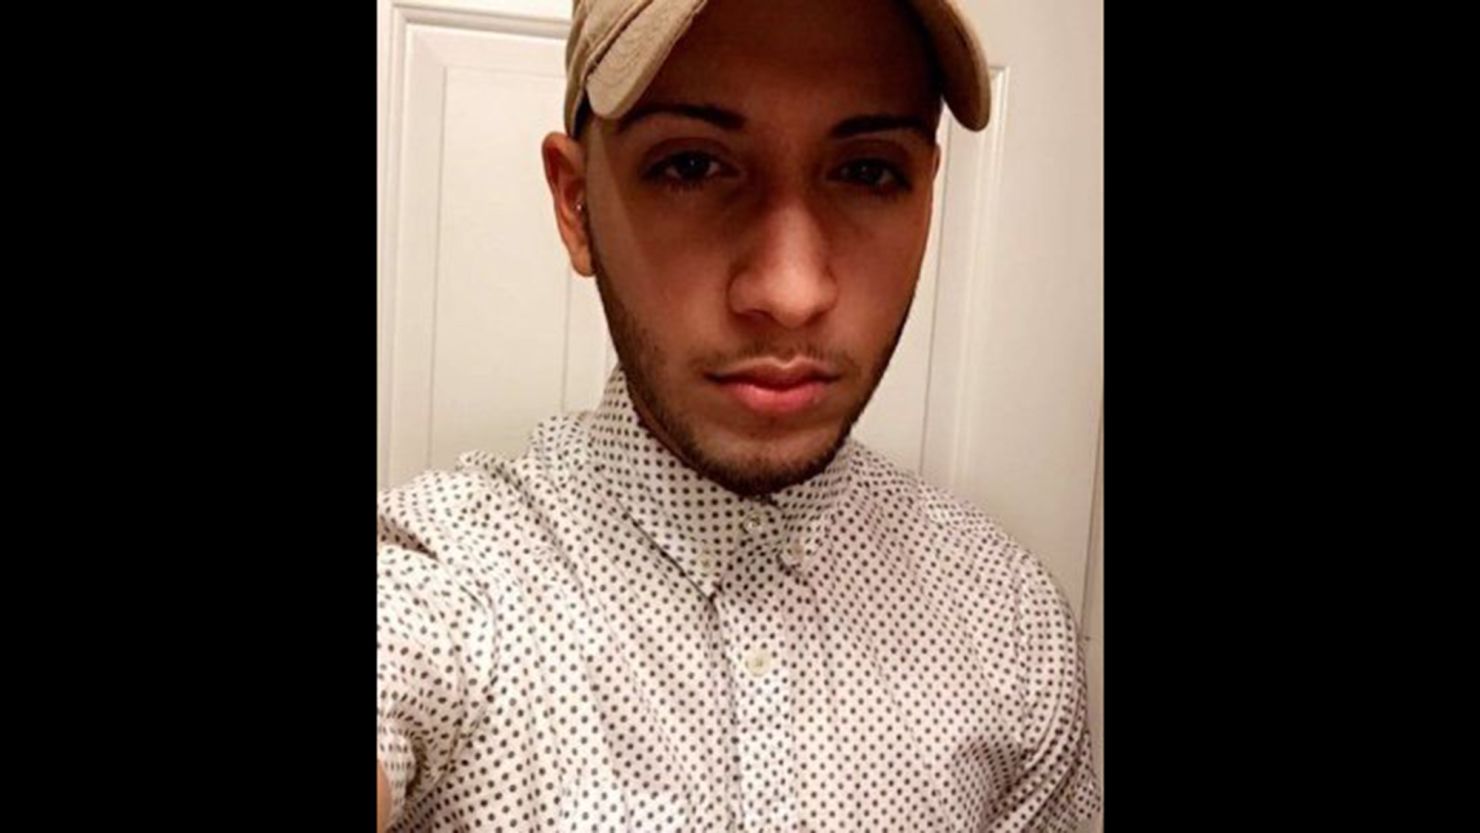 Luis Omar Ocasio-Capo, 20, is one of the victims who was killed after a gunman opened fire at a nightclub in Orlando, Florida on Saturday night, killing 49 people and injuring 53 others.